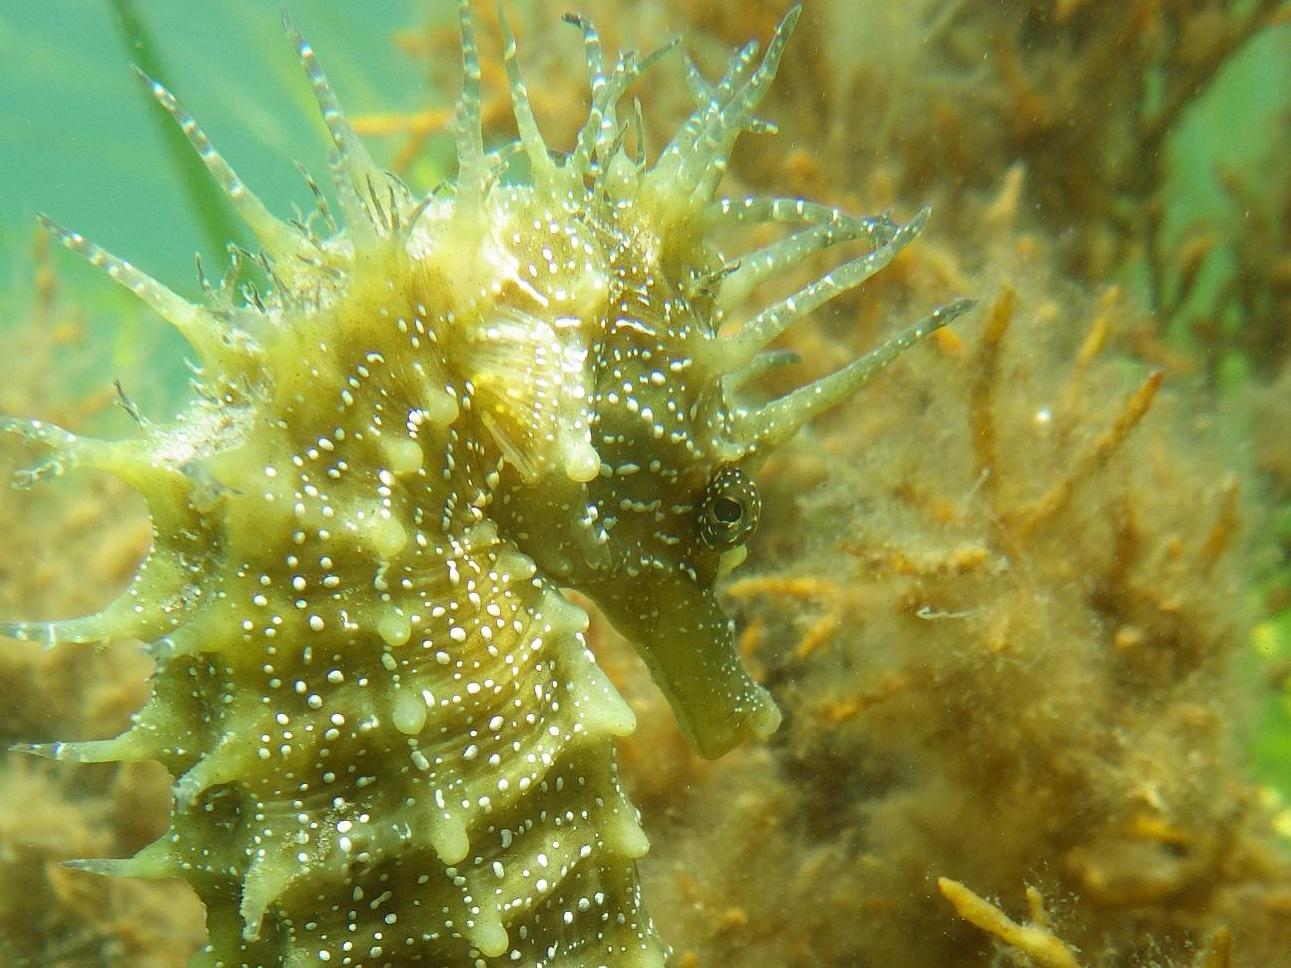 Endangered seahorse returns home amid lockdown to enjoy 'lack of boats and people'